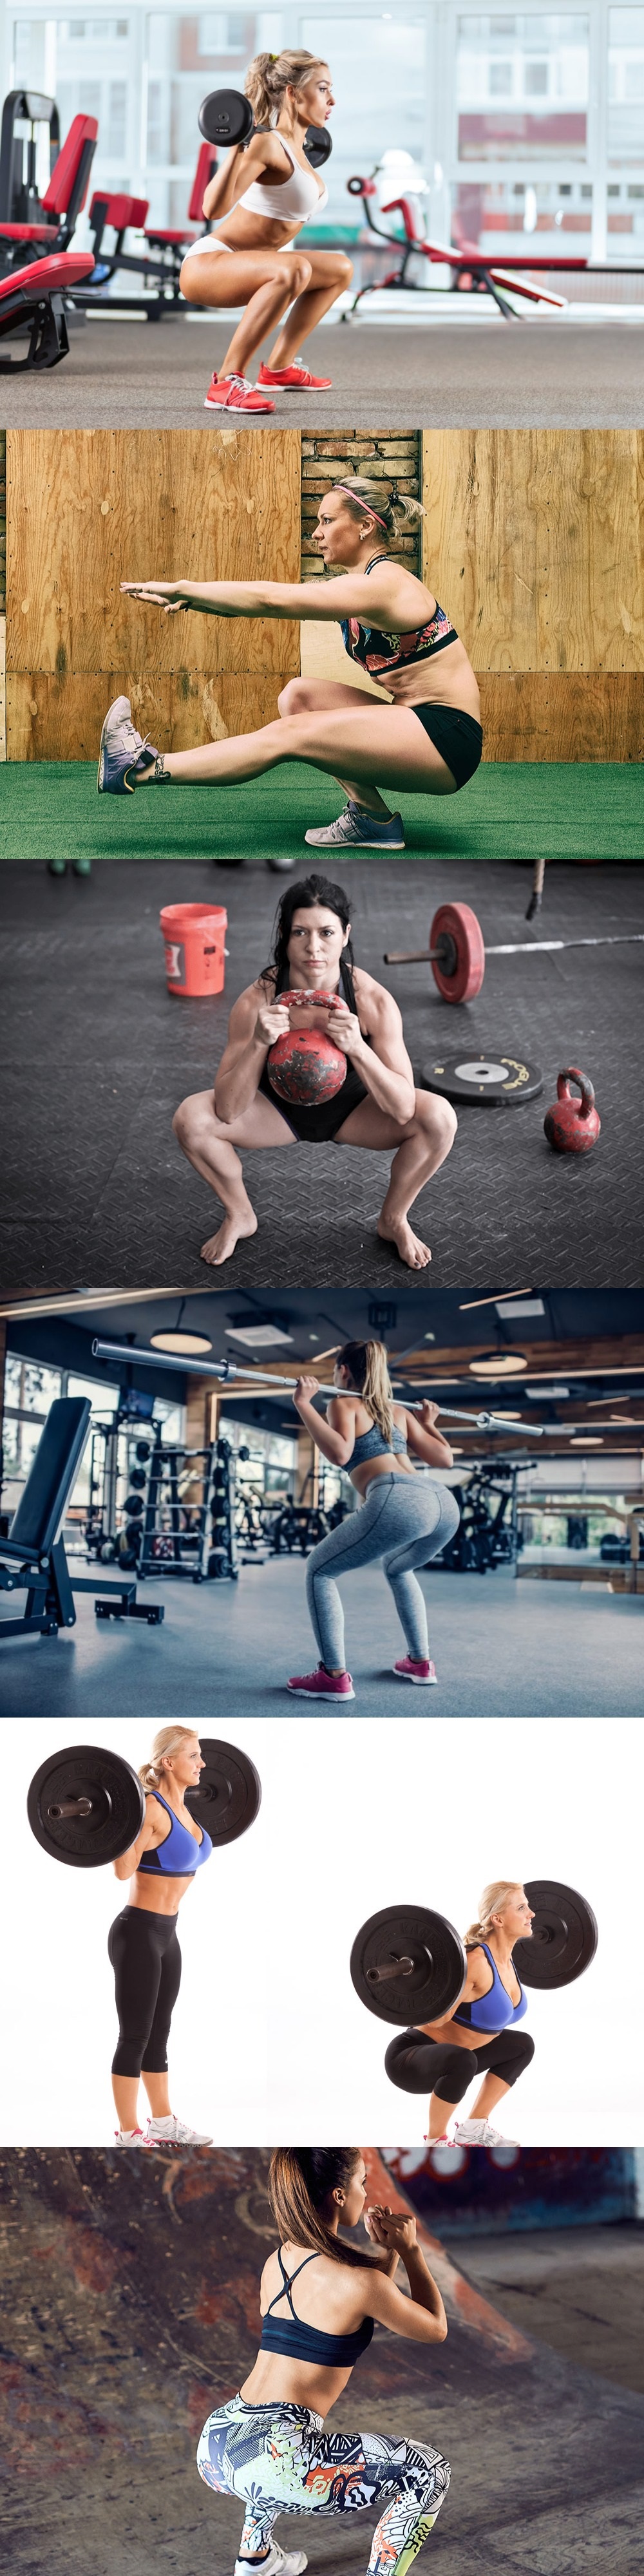 Types of Squats for Butt